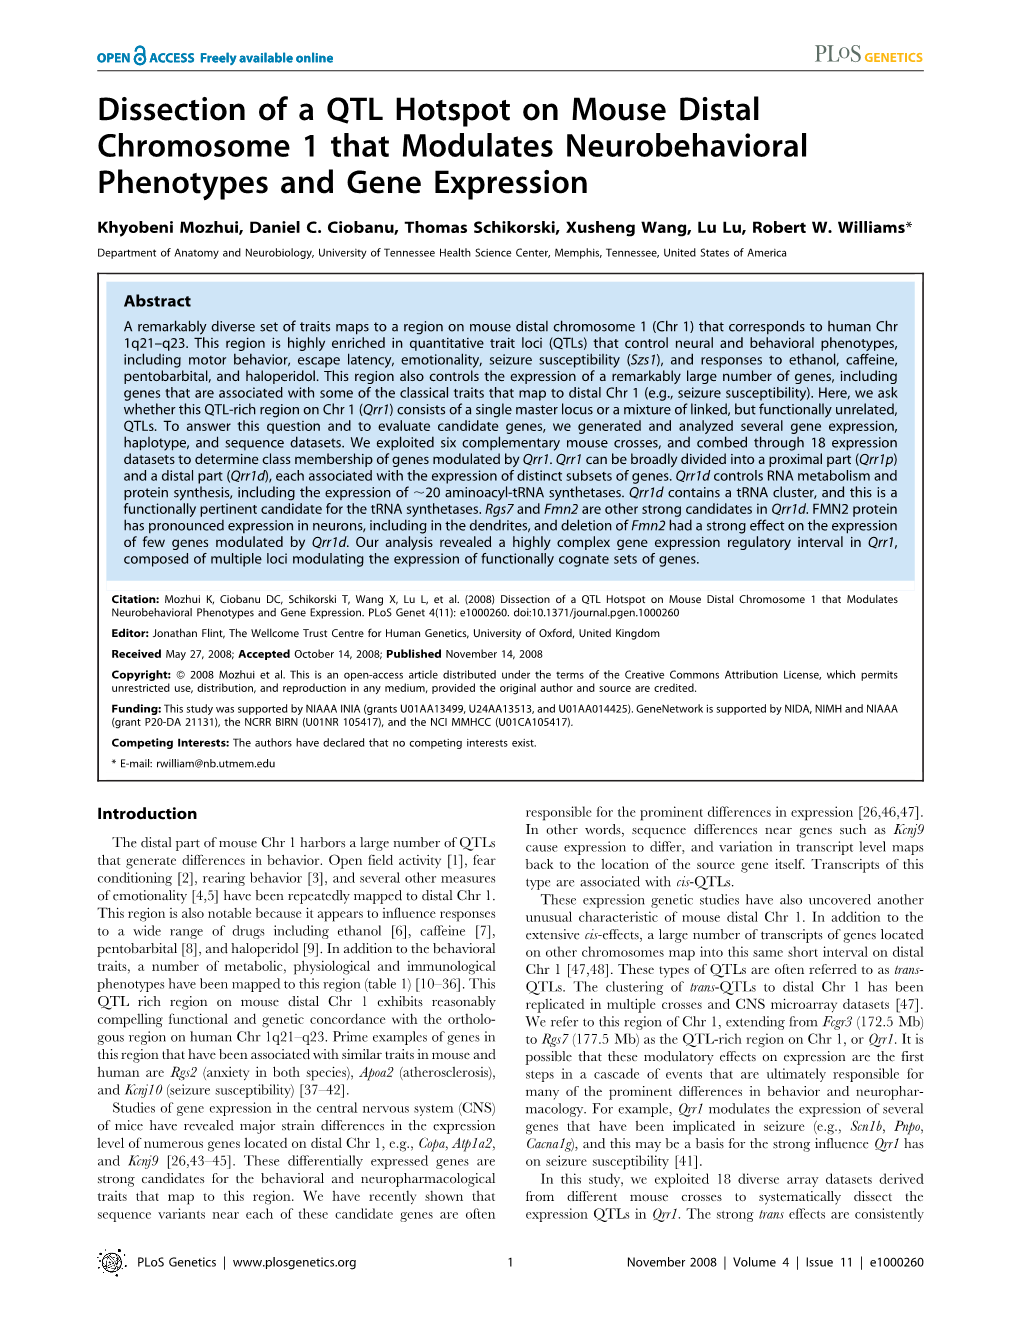 Dissection of a QTL Hotspot on Mouse Distal Chromosome 1 That Modulates Neurobehavioral Phenotypes and Gene Expression